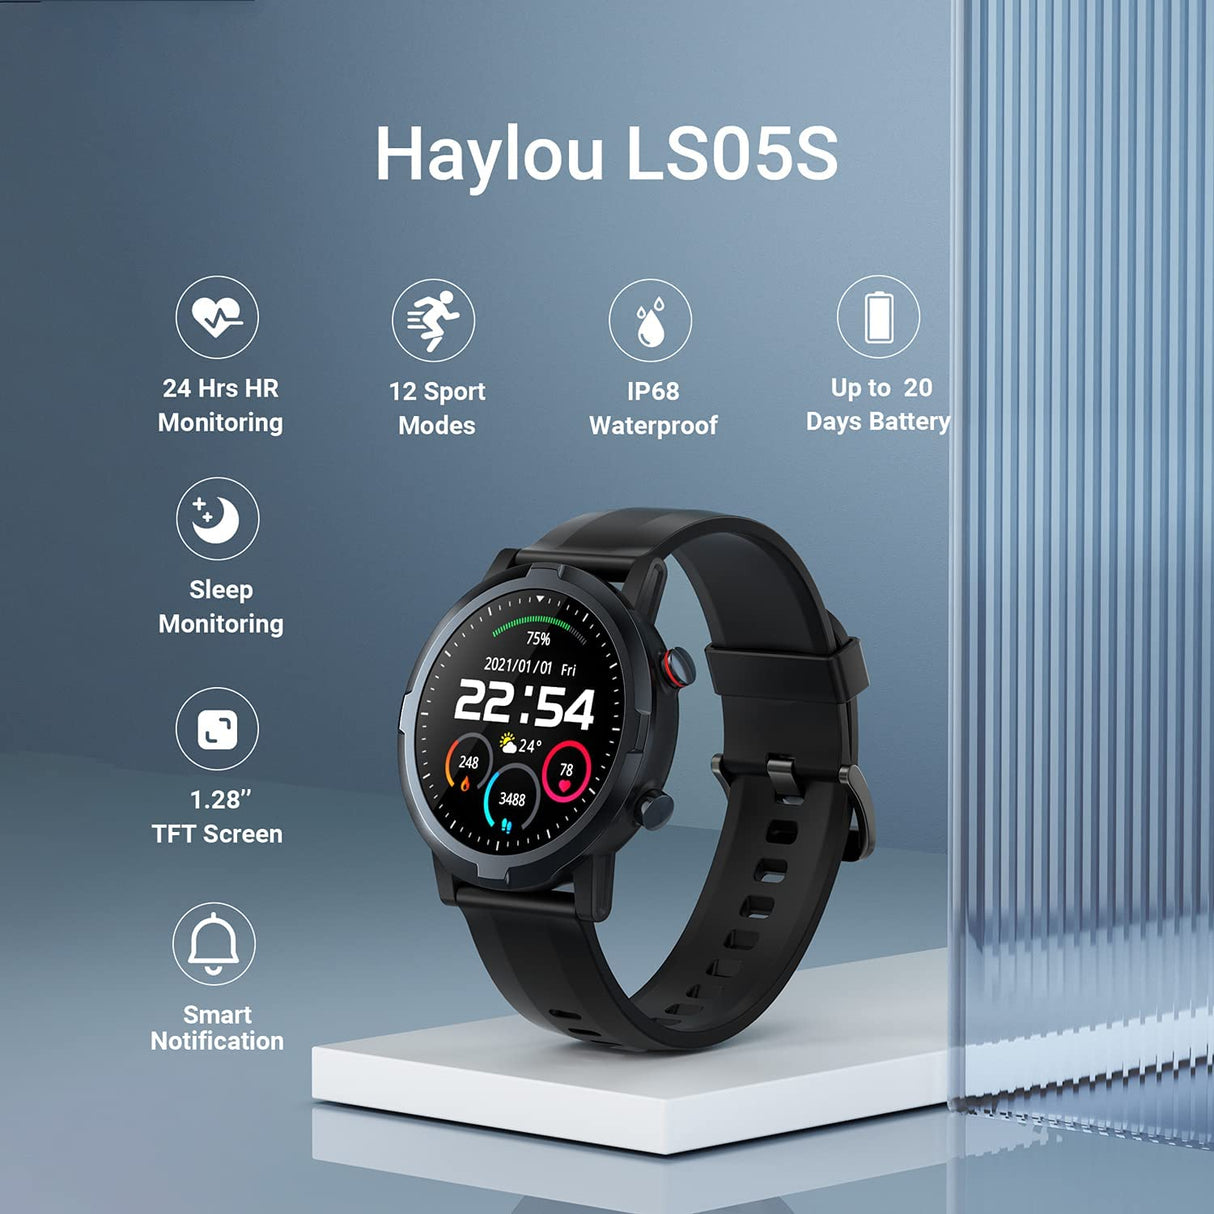 HAYLOU LS05S Men's & Women's Health & Fitness Tracker Smartwatch with Heart Rate Monitor for Apple iOS iPhone/Android (46mm)